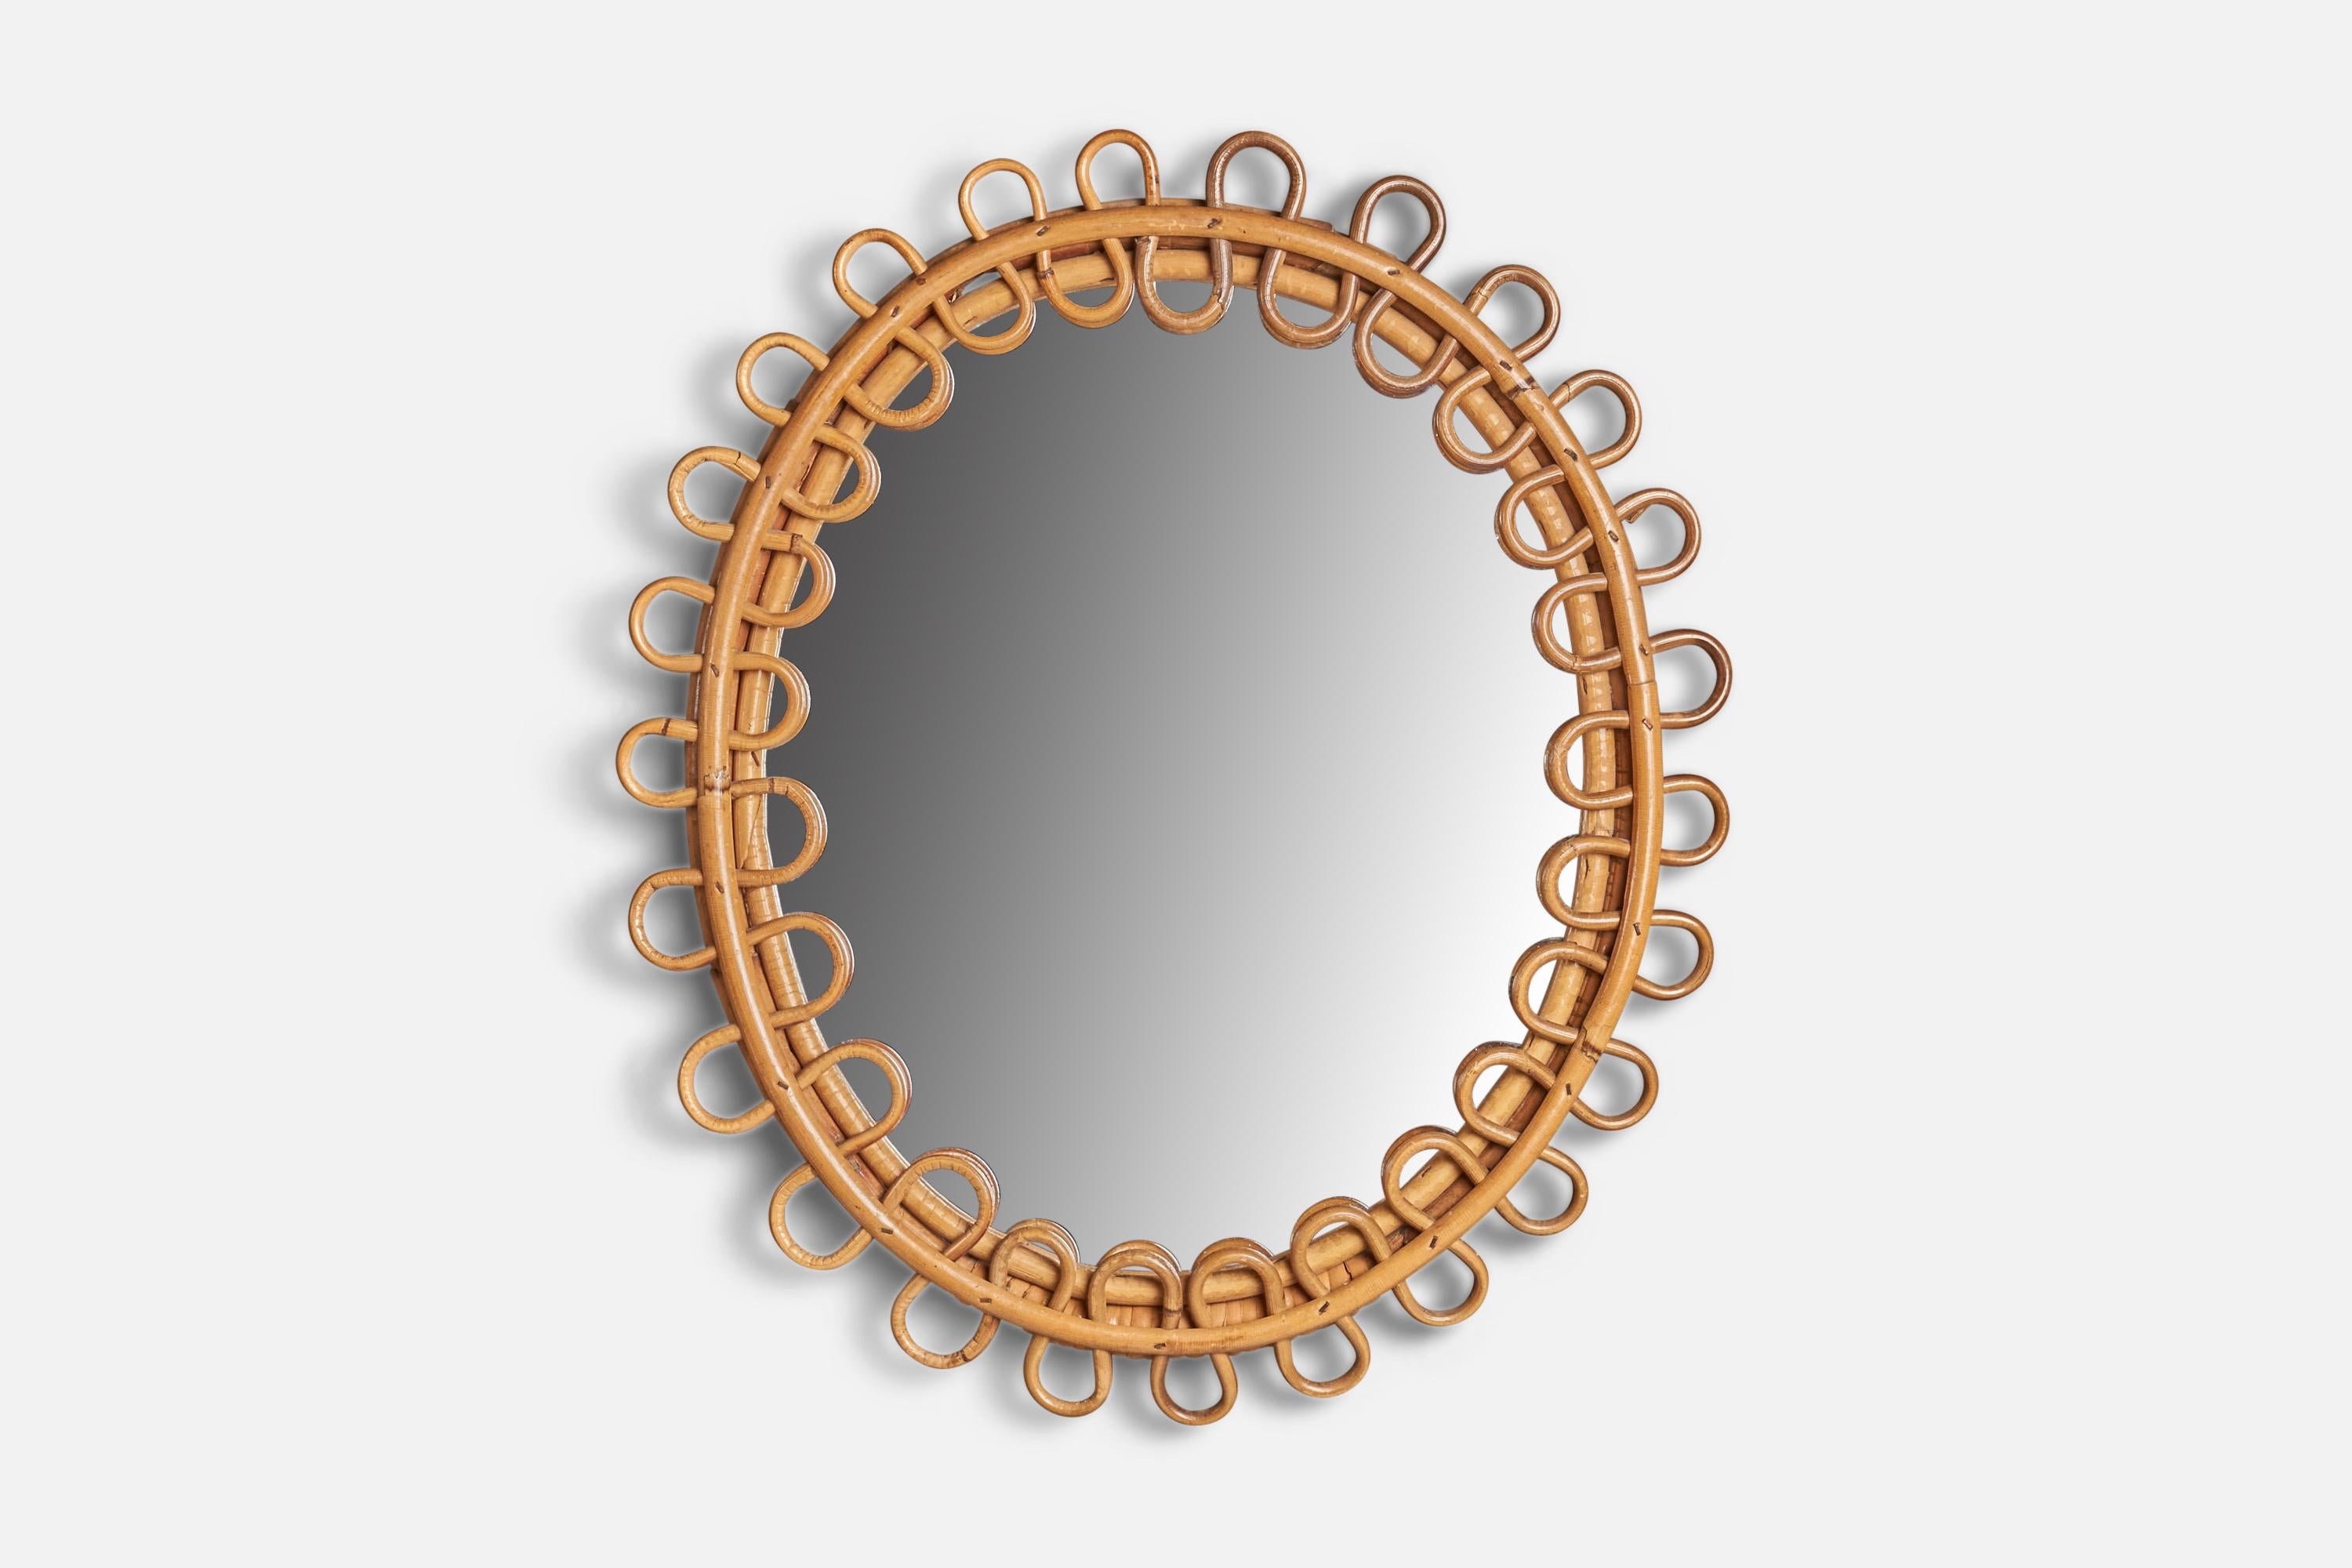 A rattan wall mirror designed and produced by an Italian Designer, Italy, 1960s.